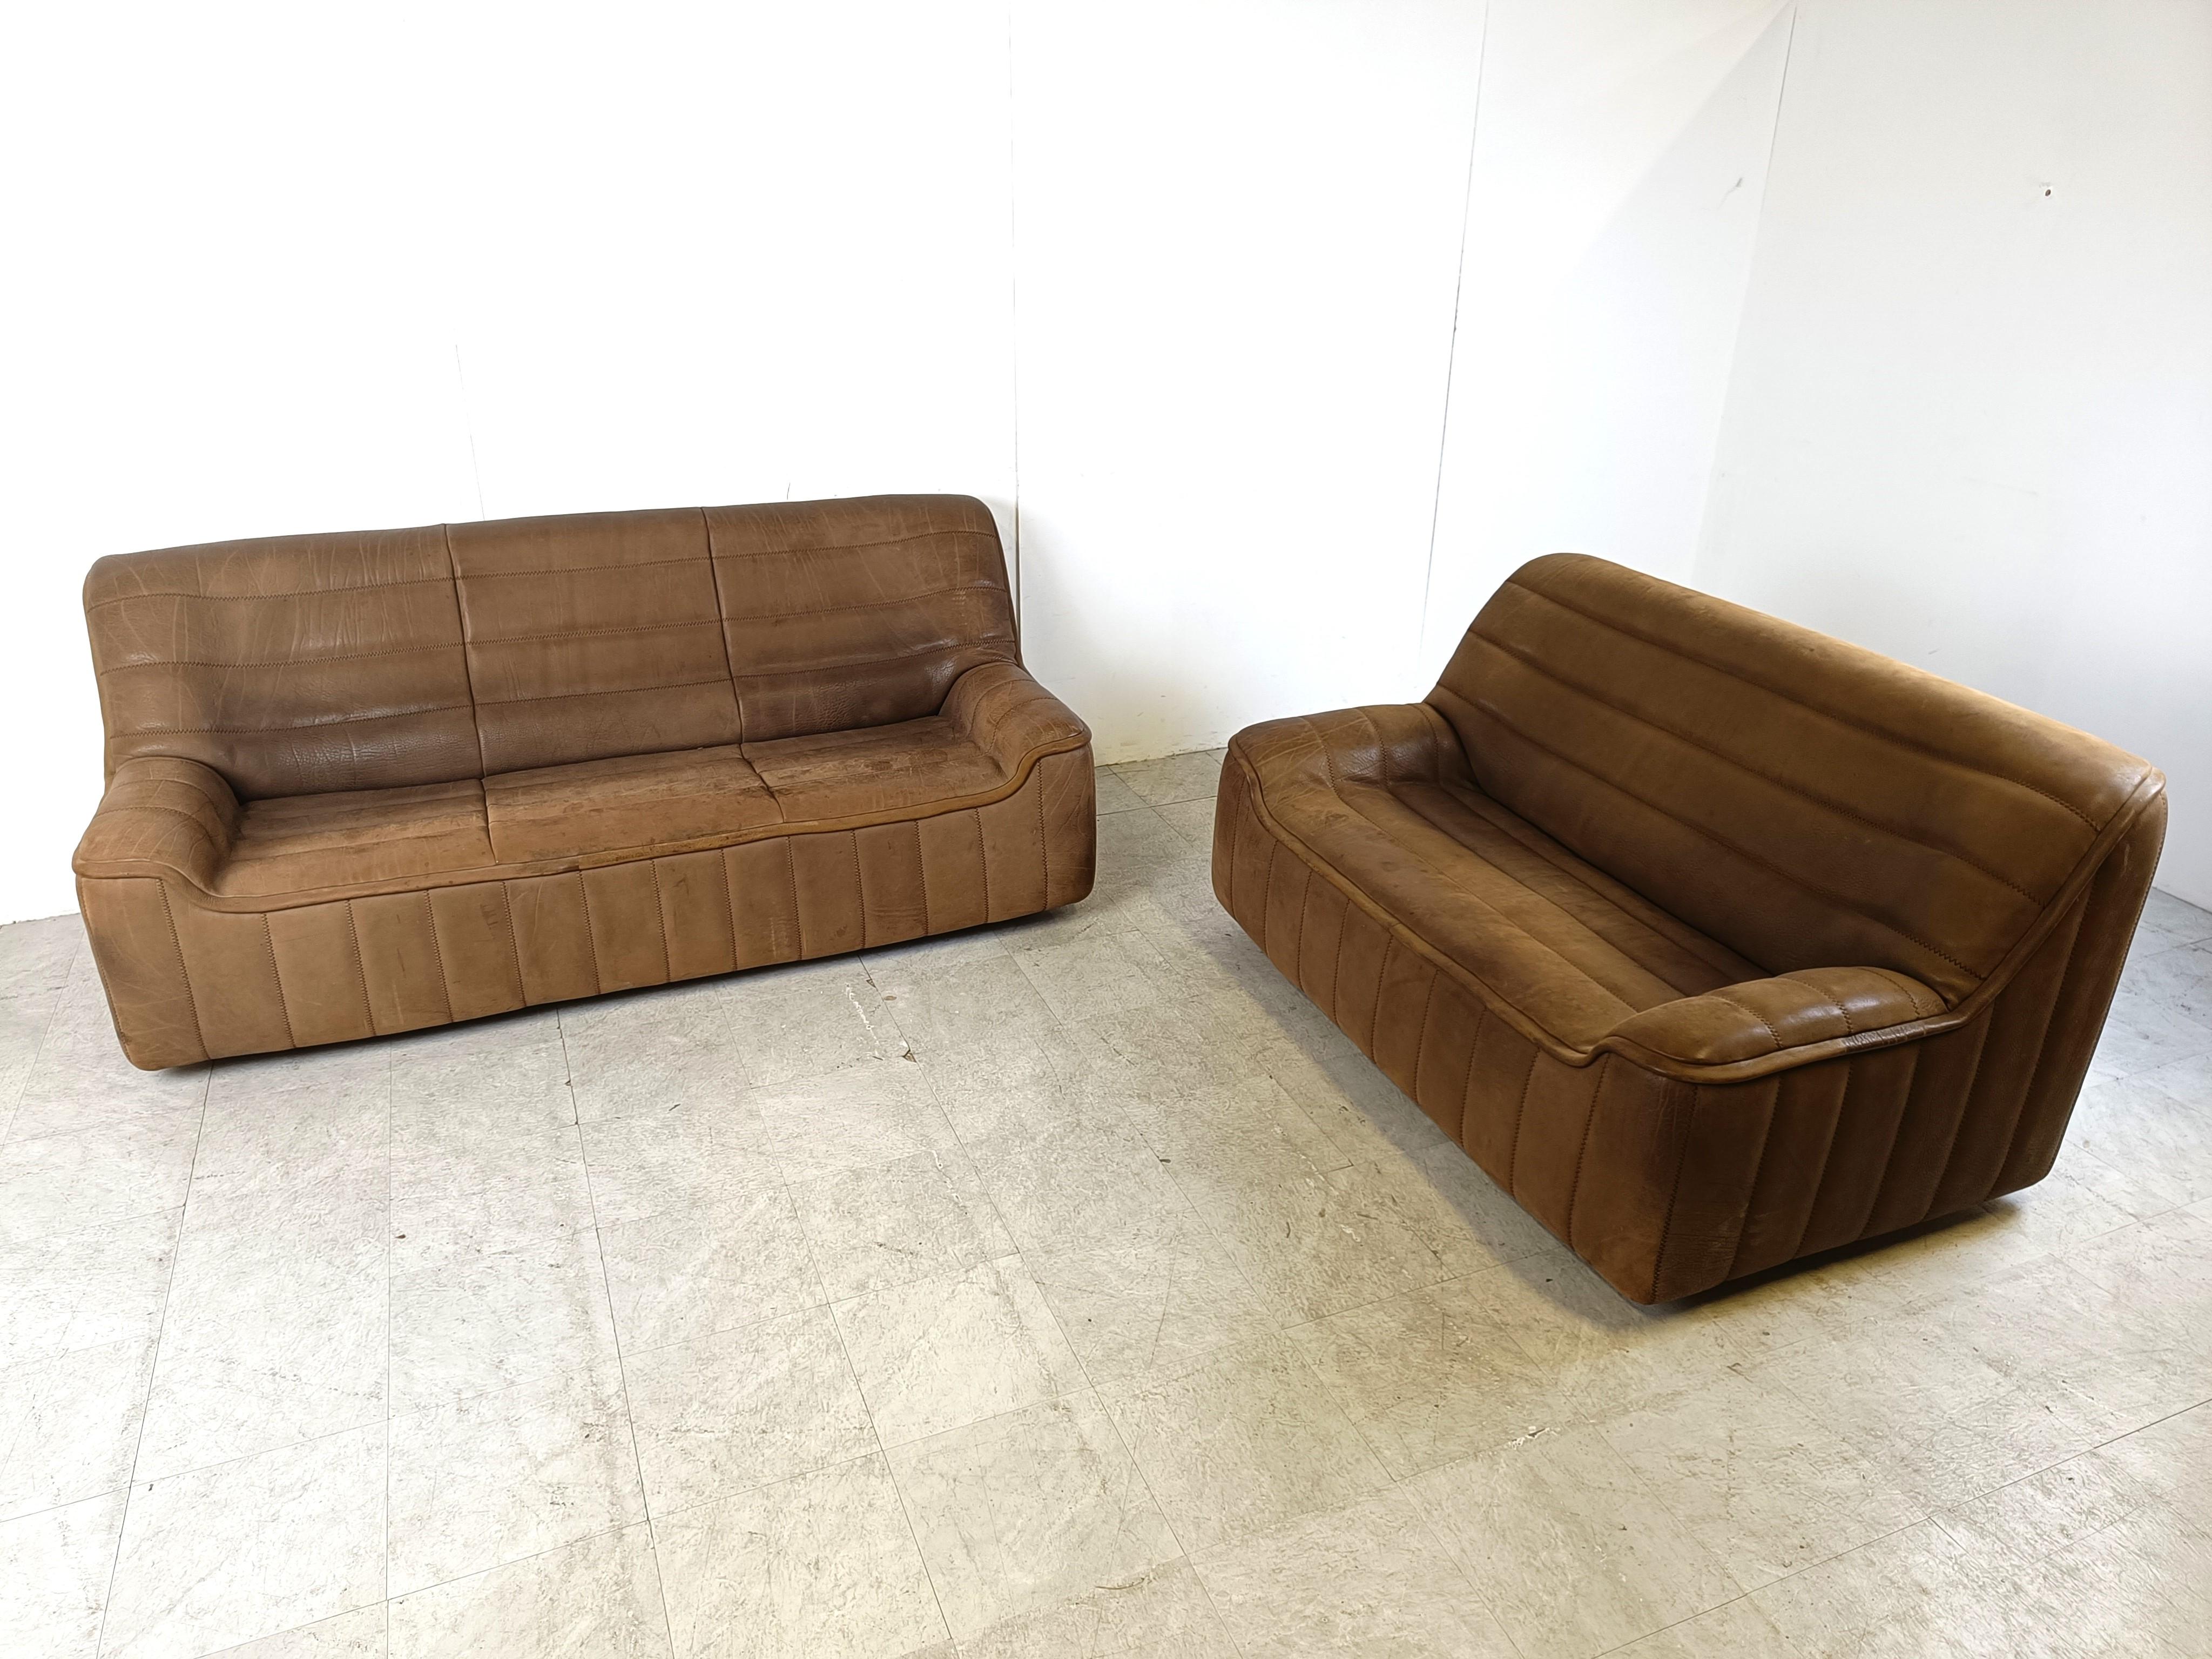 Set of gorgeous leather DS86 sofas from De Sede.

De Sede, renowned for using the best quality leather has created some wonderful sofas.

These are no exception and the beautiful, thick Neck leather will be ever lasting.

Combined with the curvy